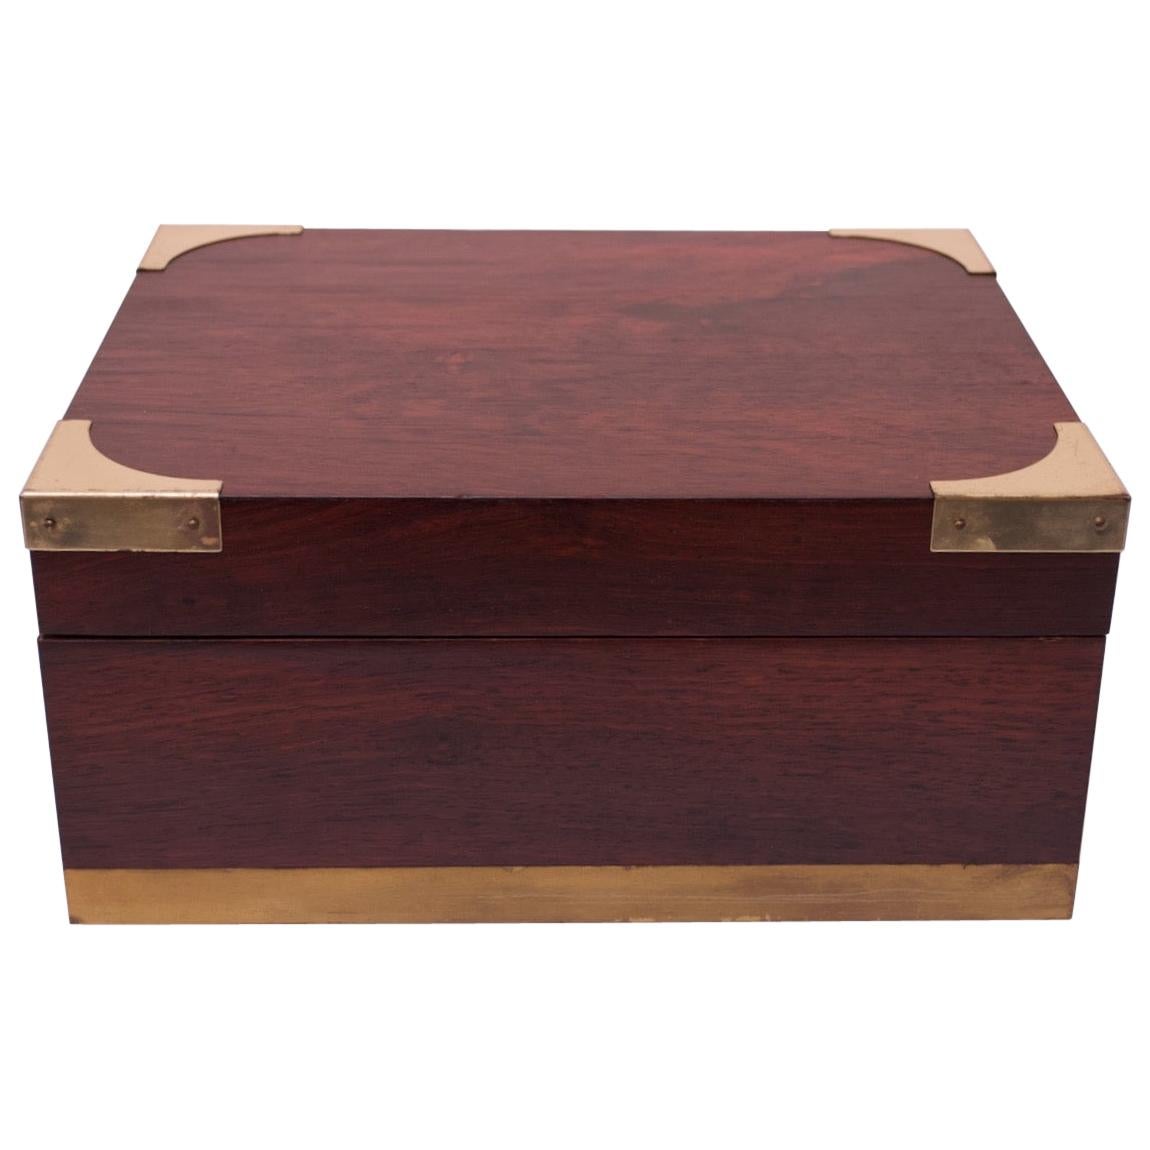 Vintage Rosewood and Spanish Cedar Cigar Box / Humidor with Brass Accents